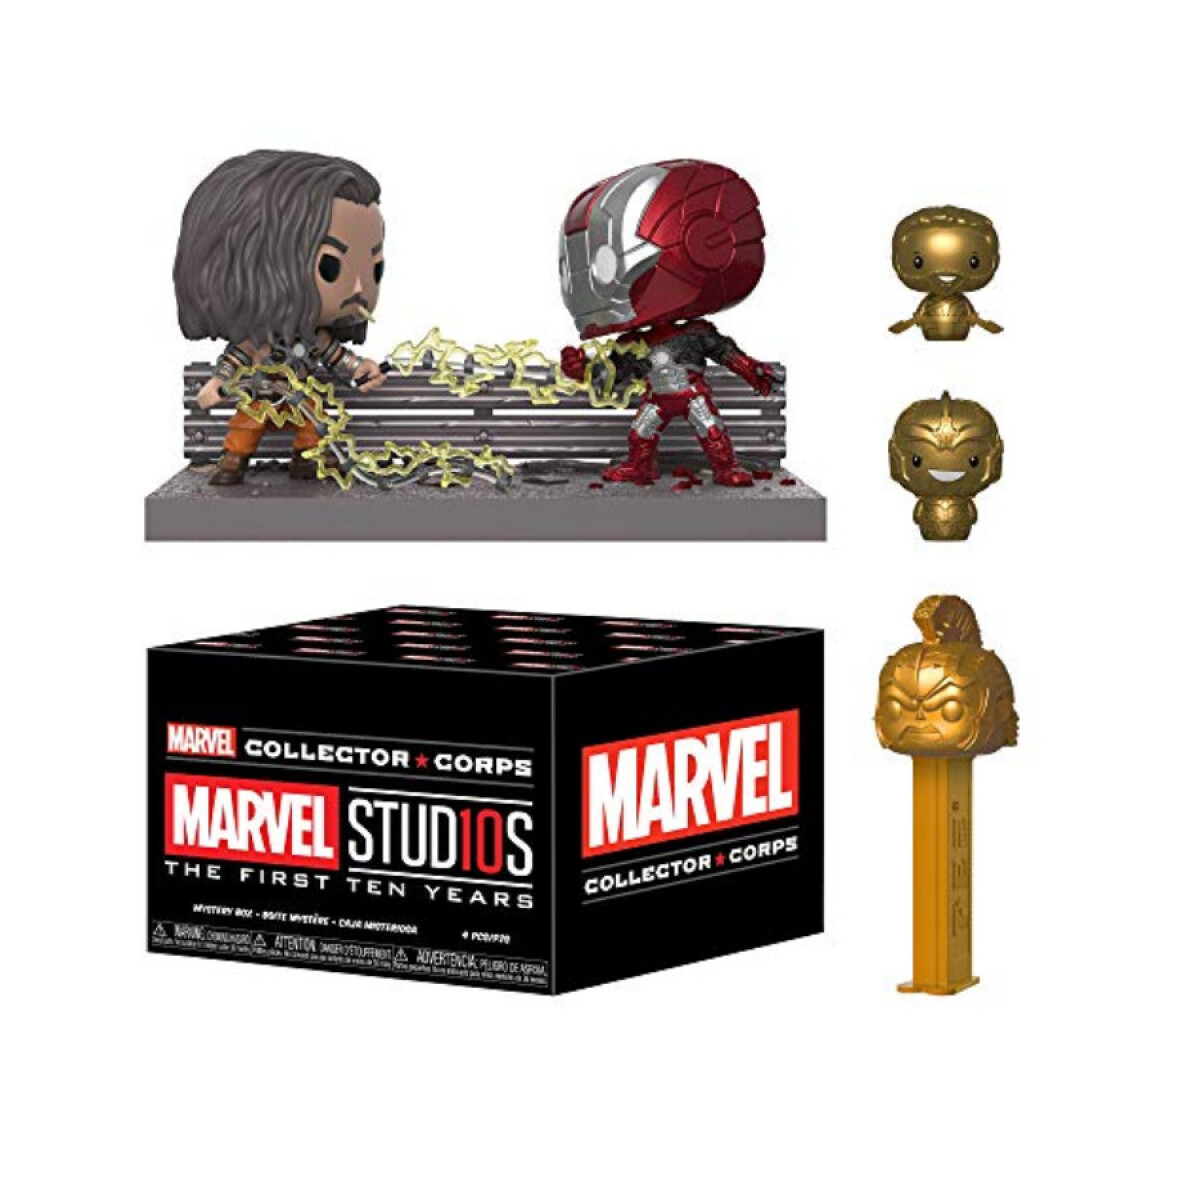 Marvel Studios Firts 10 Years Marvel Collector Corps 